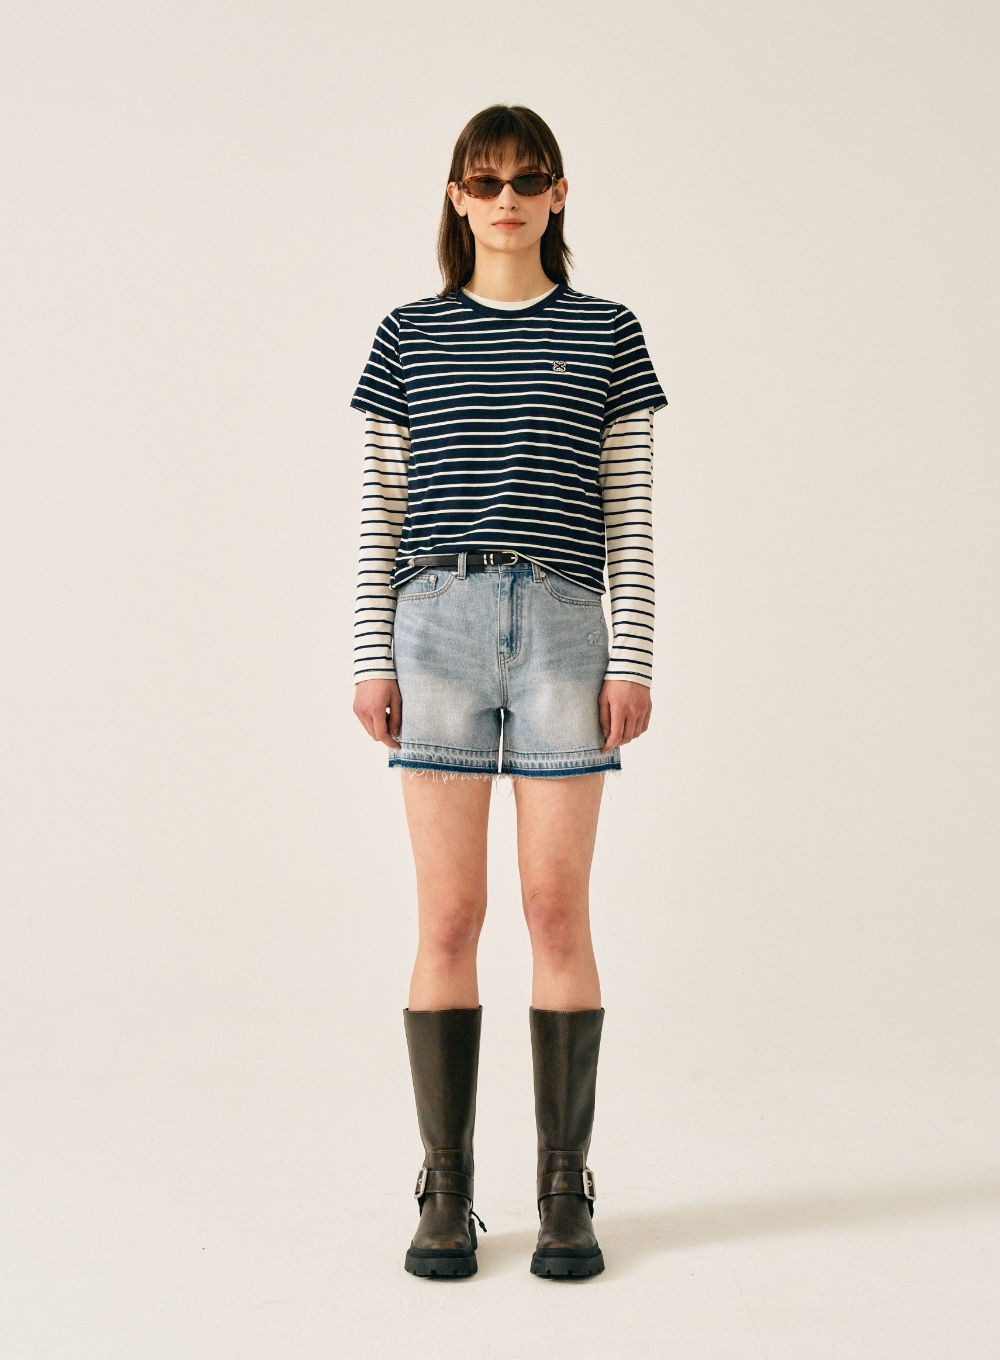 (W) All Day Cotton Stripe T-Shirt - Classic Navy